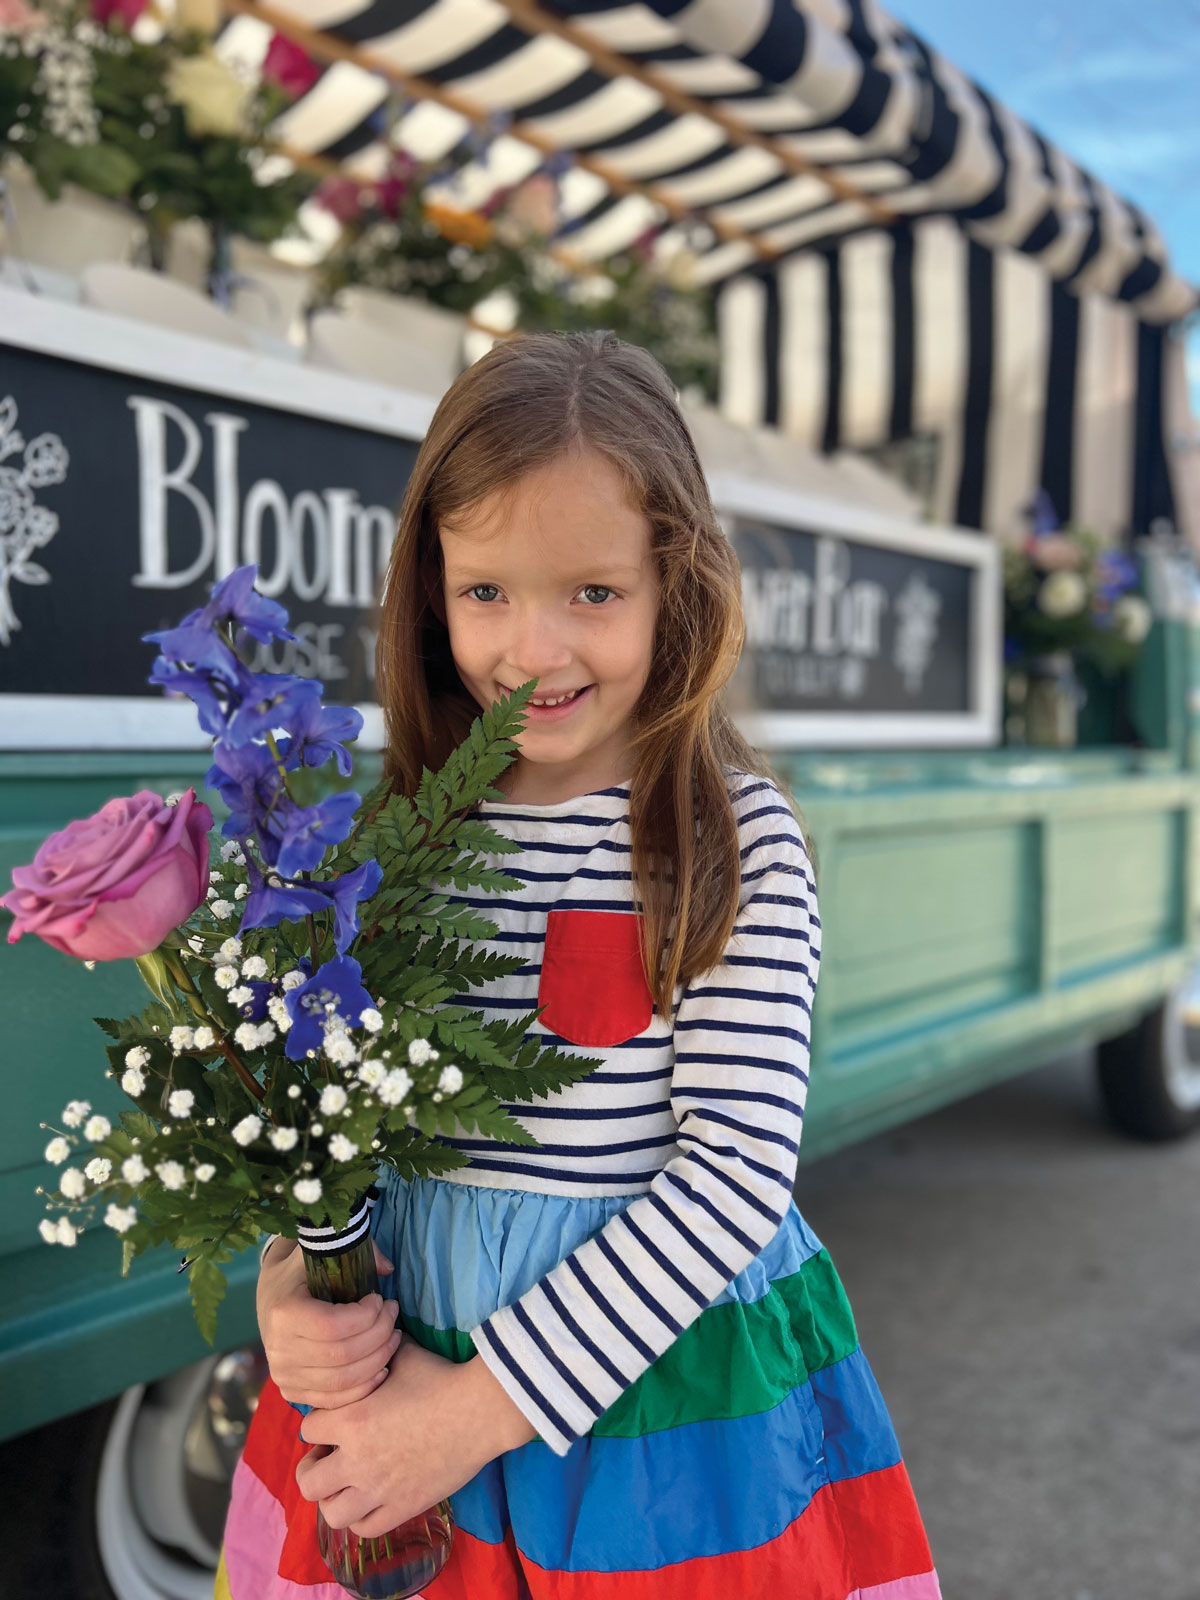 Blooms and Wishes Flowers: a little girl holding a bouquet